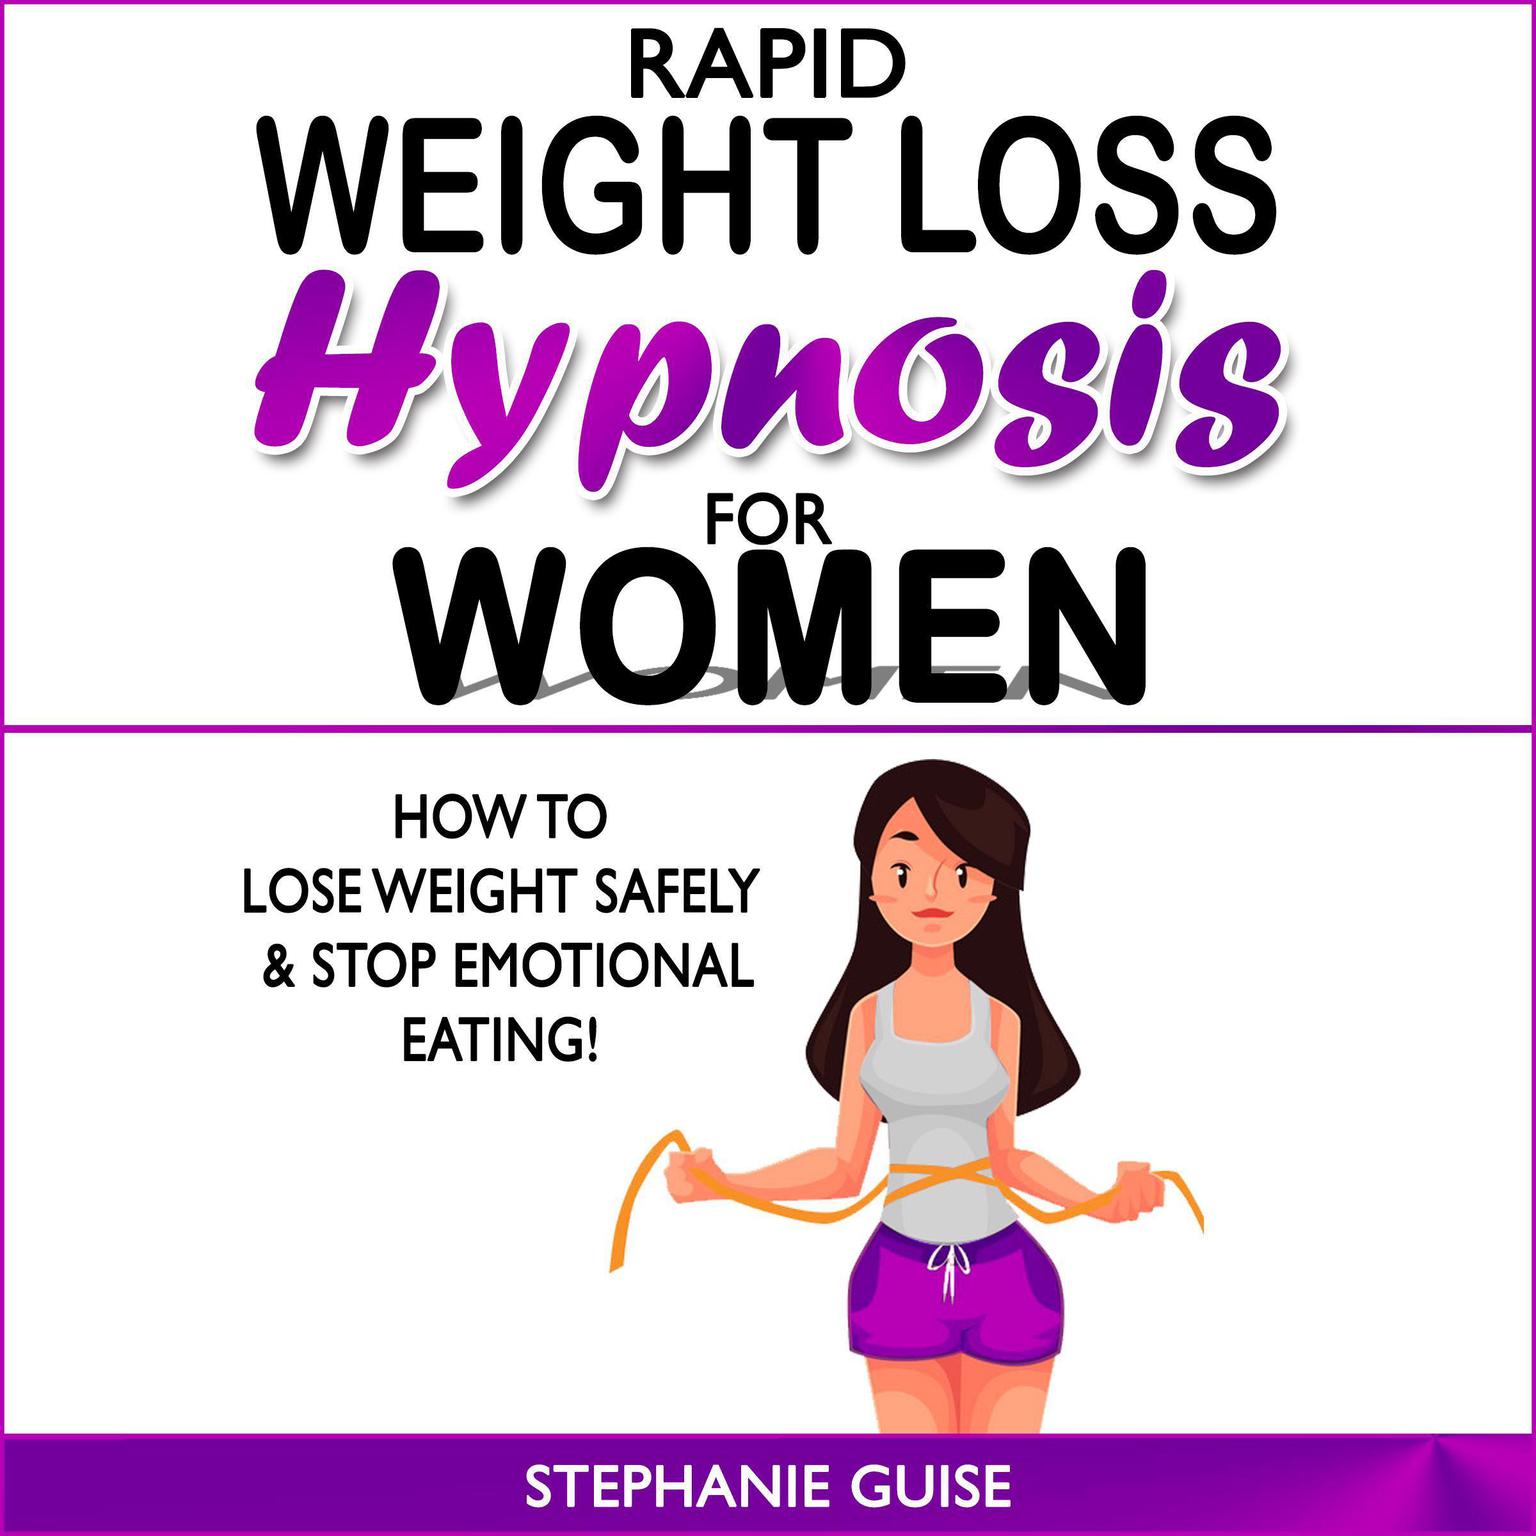 Rapid Weight Loss Hypnosis For Women: How to Lose Weight Safely and Stop Emotional Eating! How to Fat Burning and Calorie Blast with Weight Loss Meditation and Affirmations, Mini Habits, Self-Hypnosis Audiobook, by Stephanie Guise